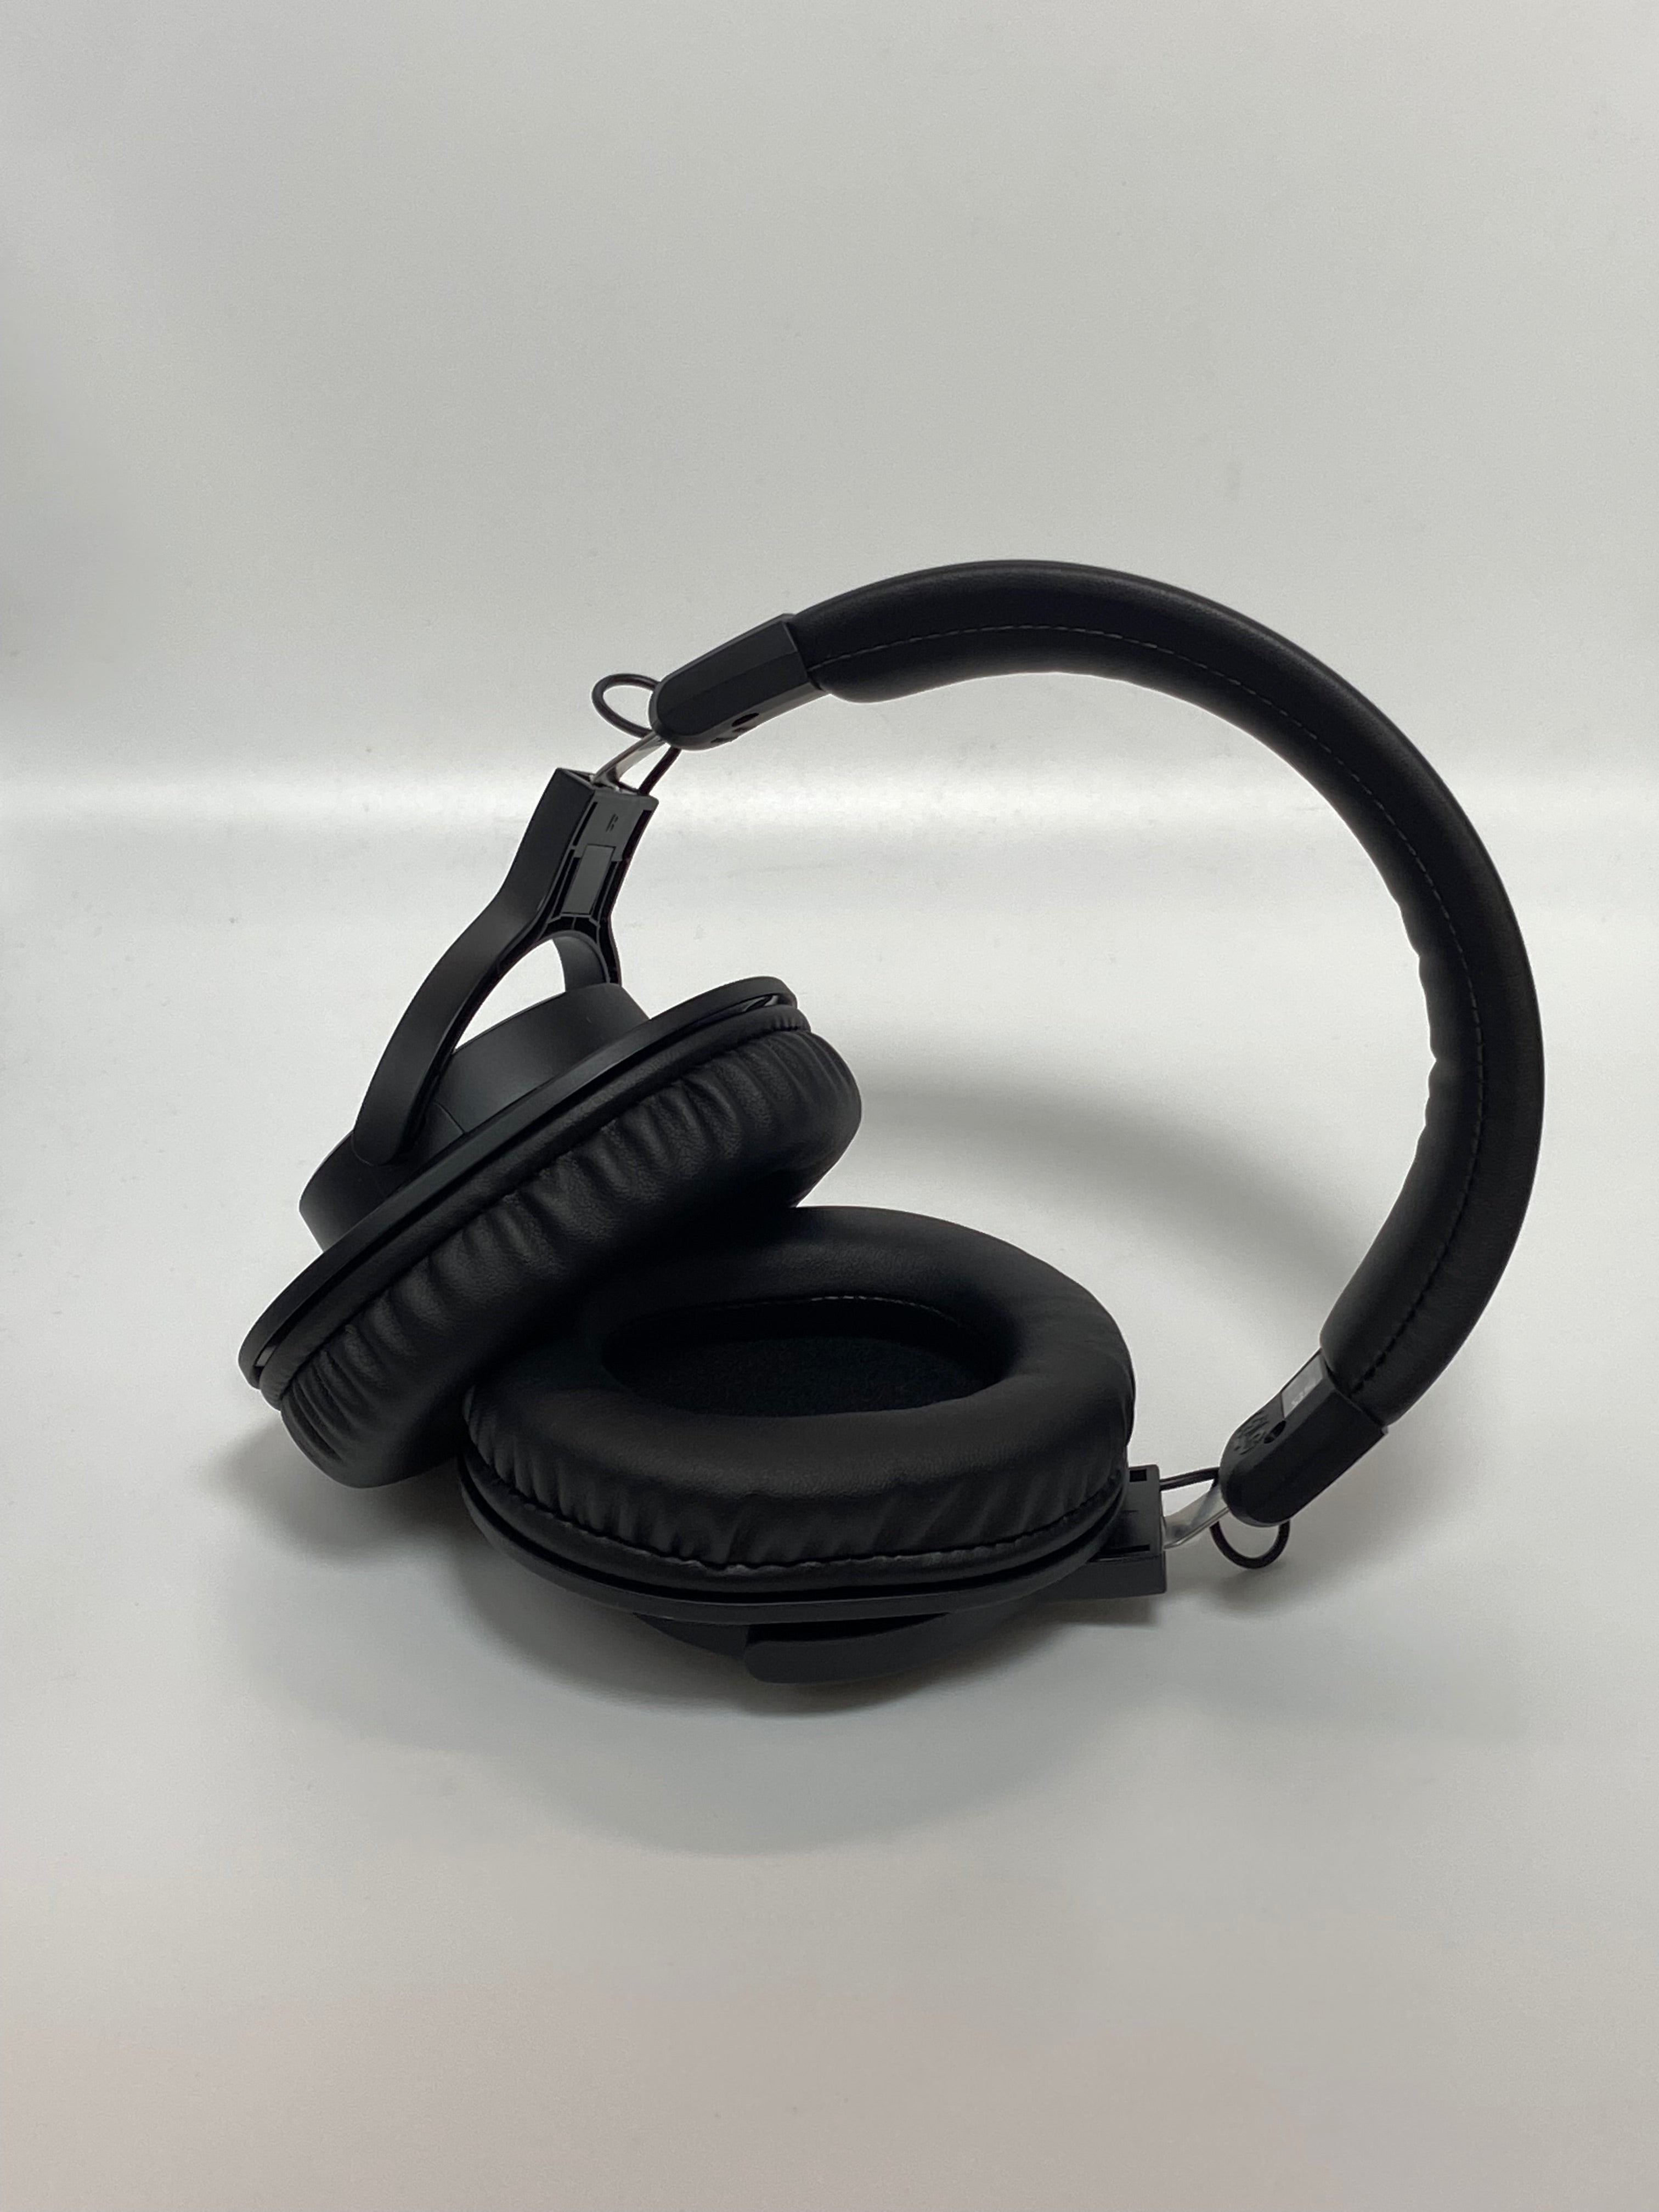 Audio-Technica ATH-M20xBT Review